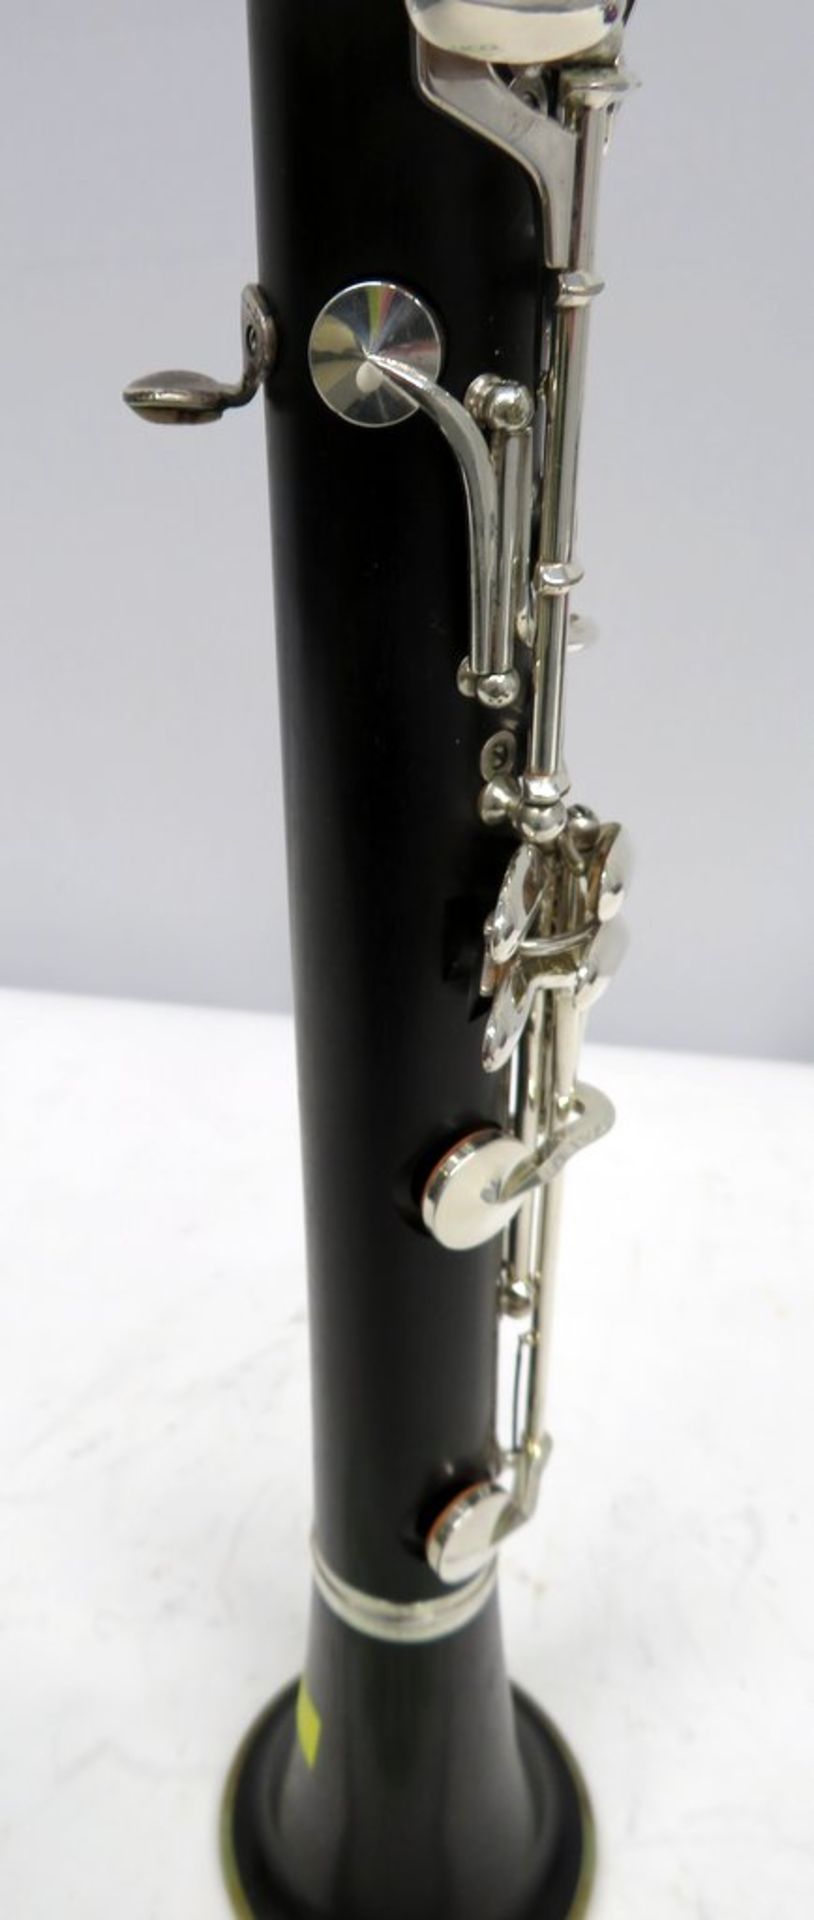 Buffet Crampon Clarinet Complete With Case. - Image 8 of 17